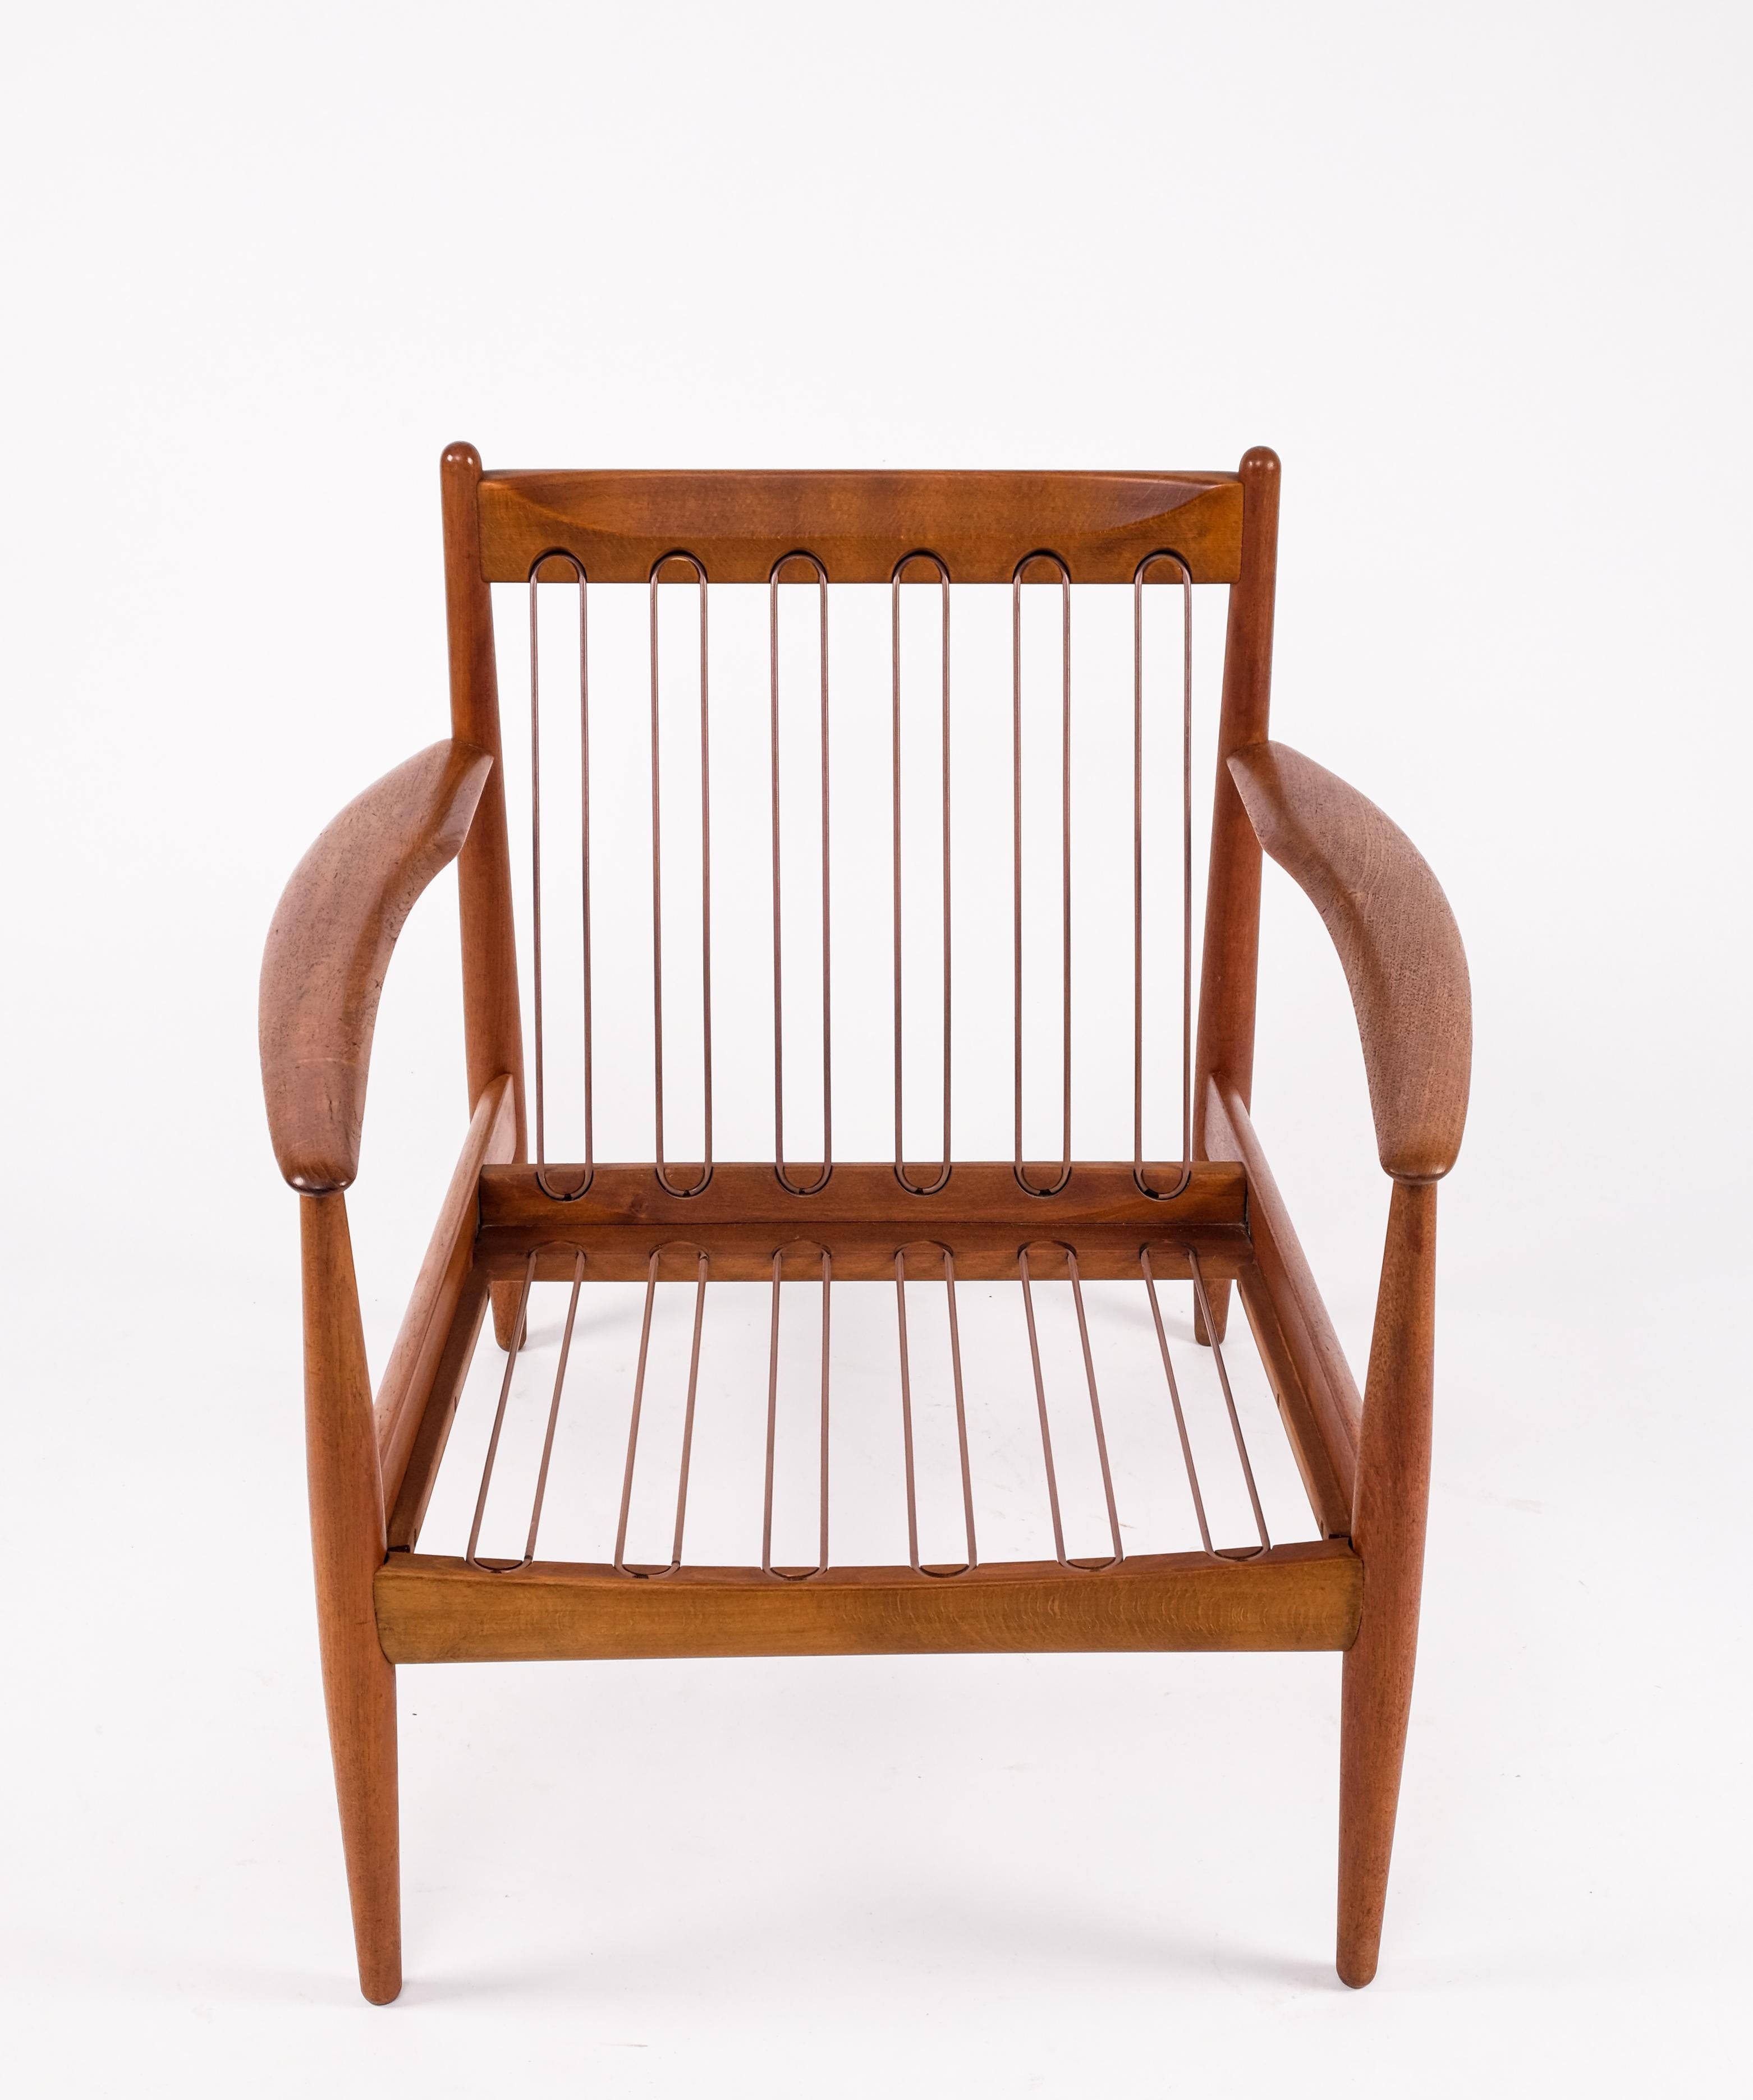 Pair of Grete Jalk Easy Chairs, Denmark, 1960s For Sale 7